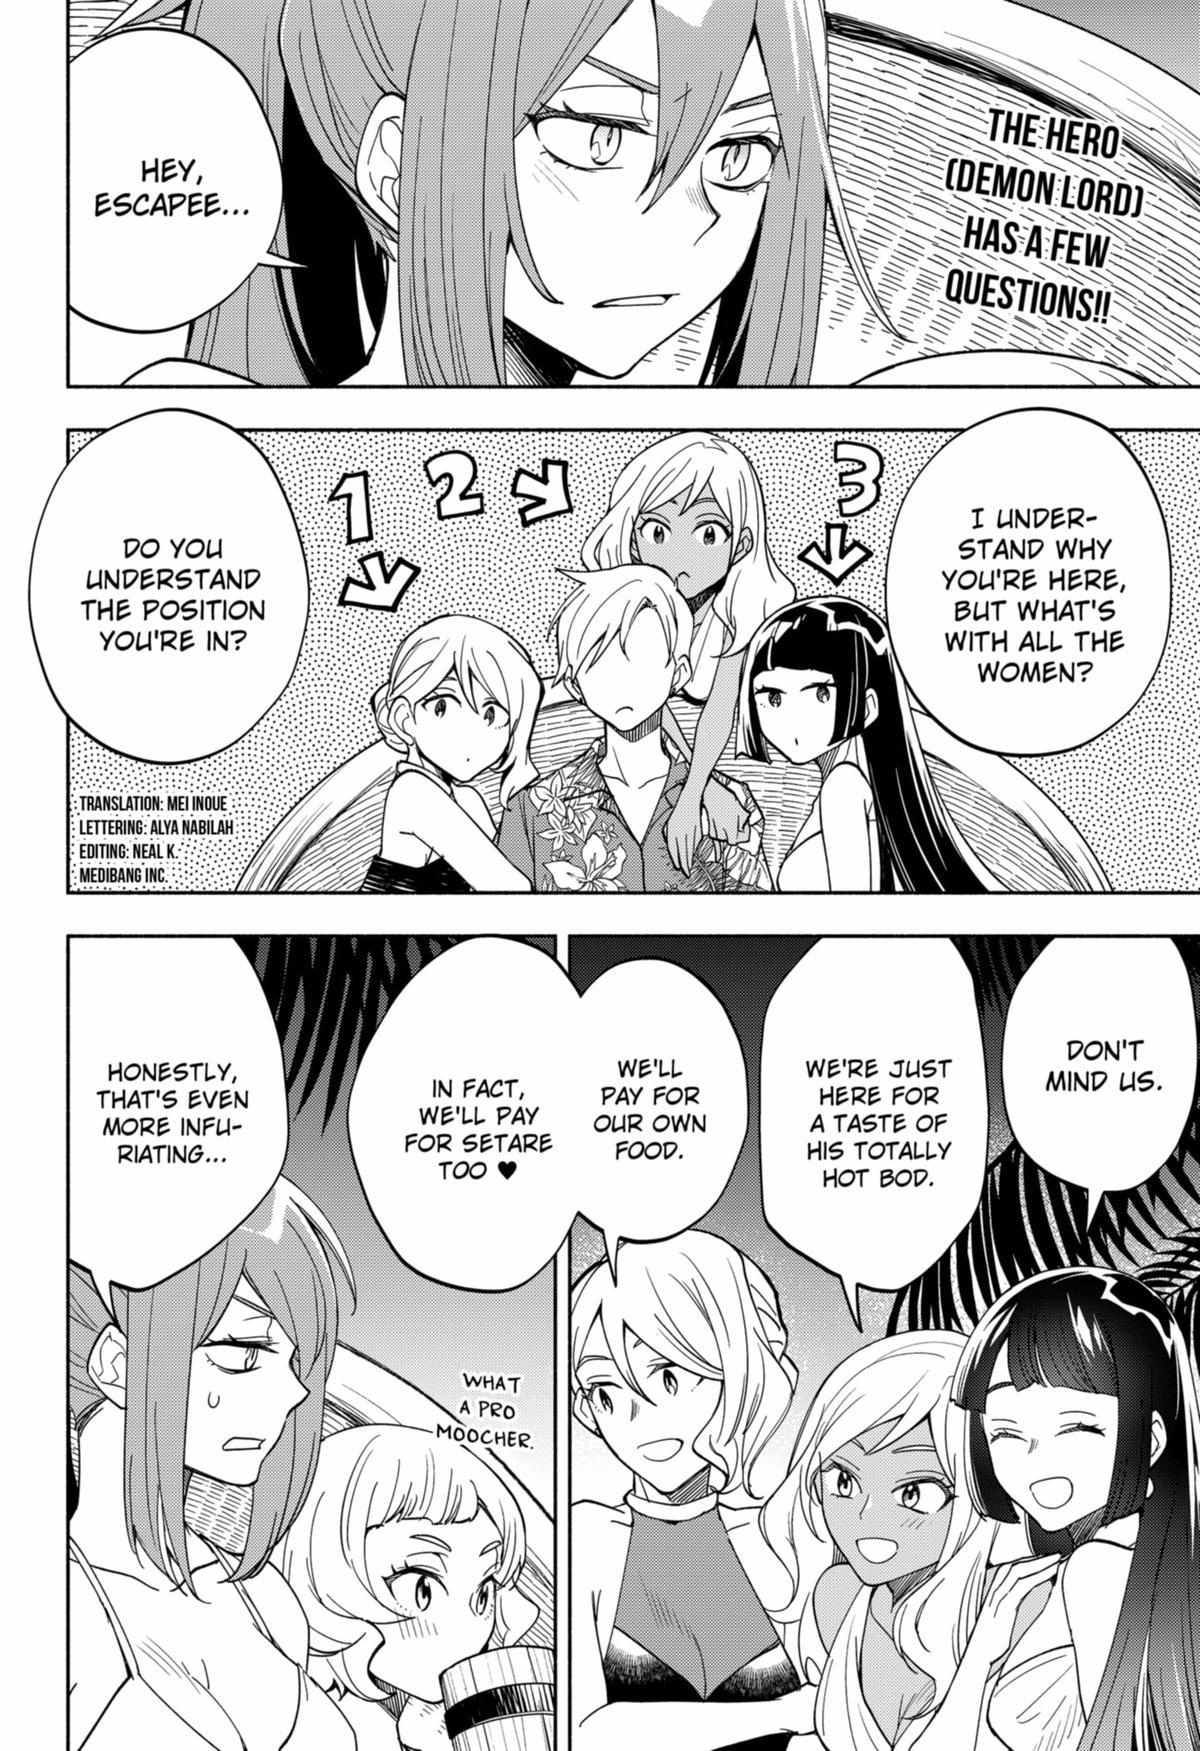 Demon Lord Exchange!! - Page 2